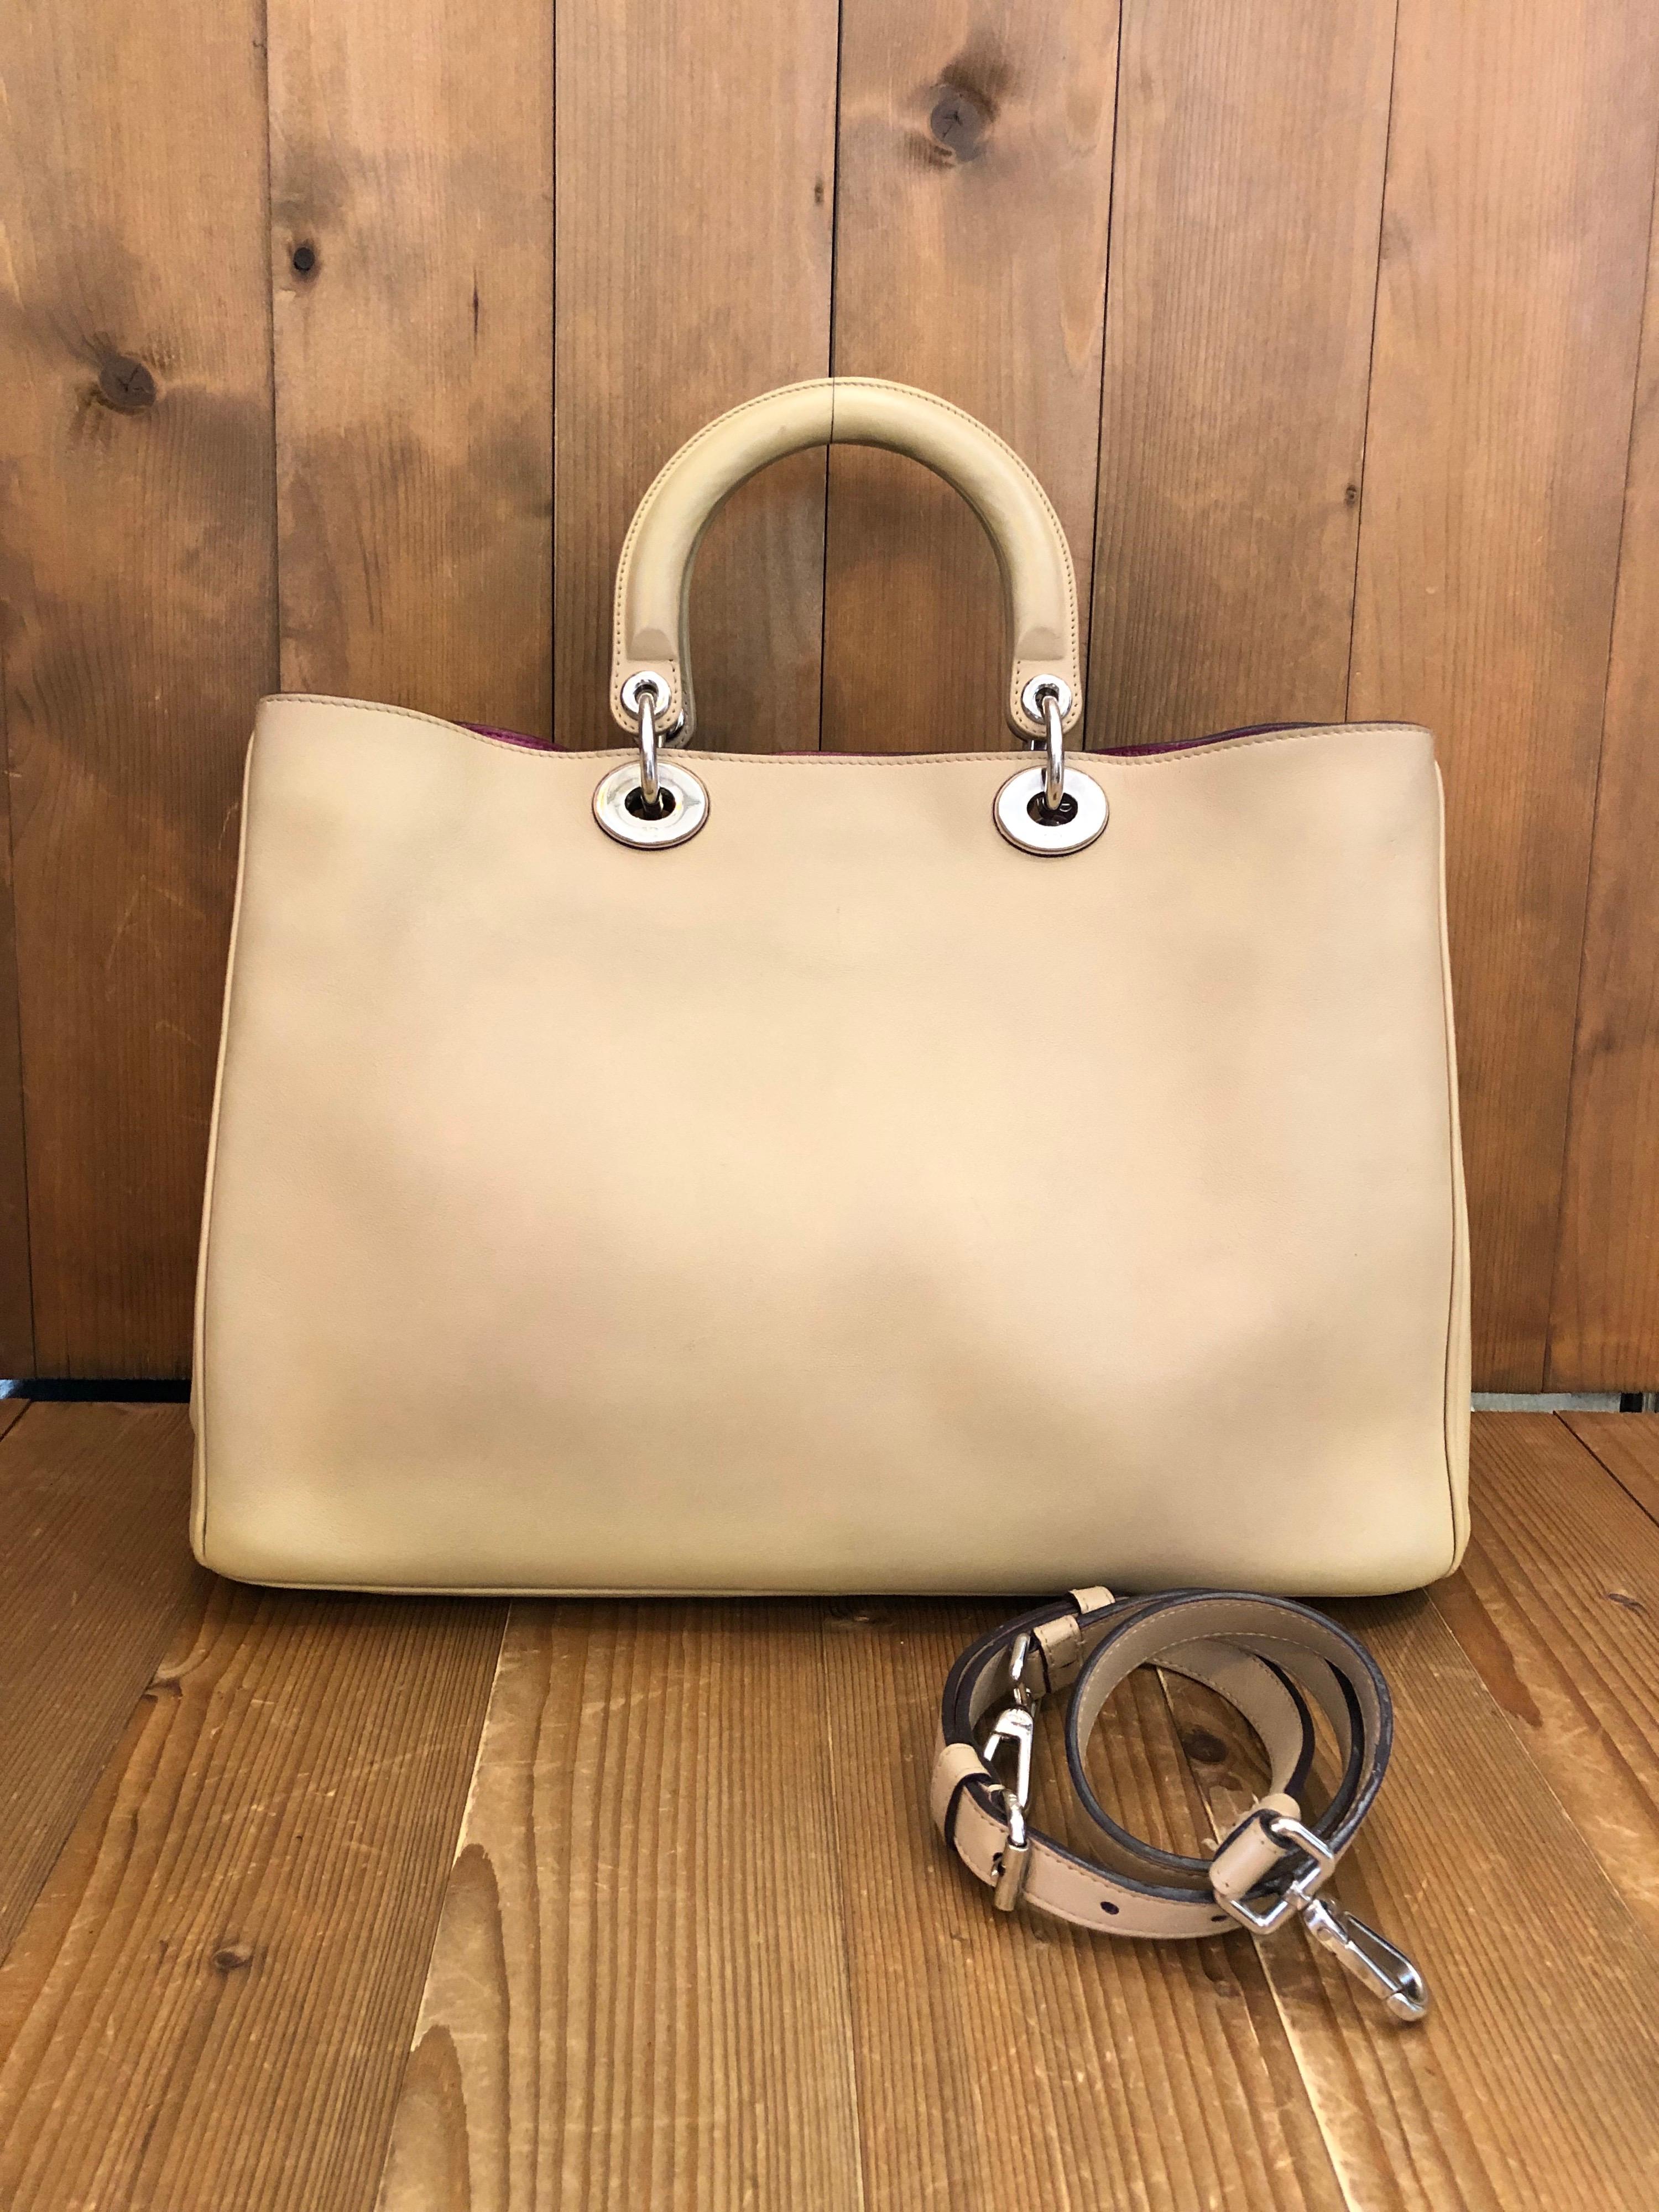 2010s Christian Dior shoulder tote bag in beige leather and silver hardware featuring two interior open pockets. Made in Italy. Measures 15 x 10.25 x 5 inches 
Strap length 33 inches. Comes with shoulder strap.

Condition: Minor signs of wear.